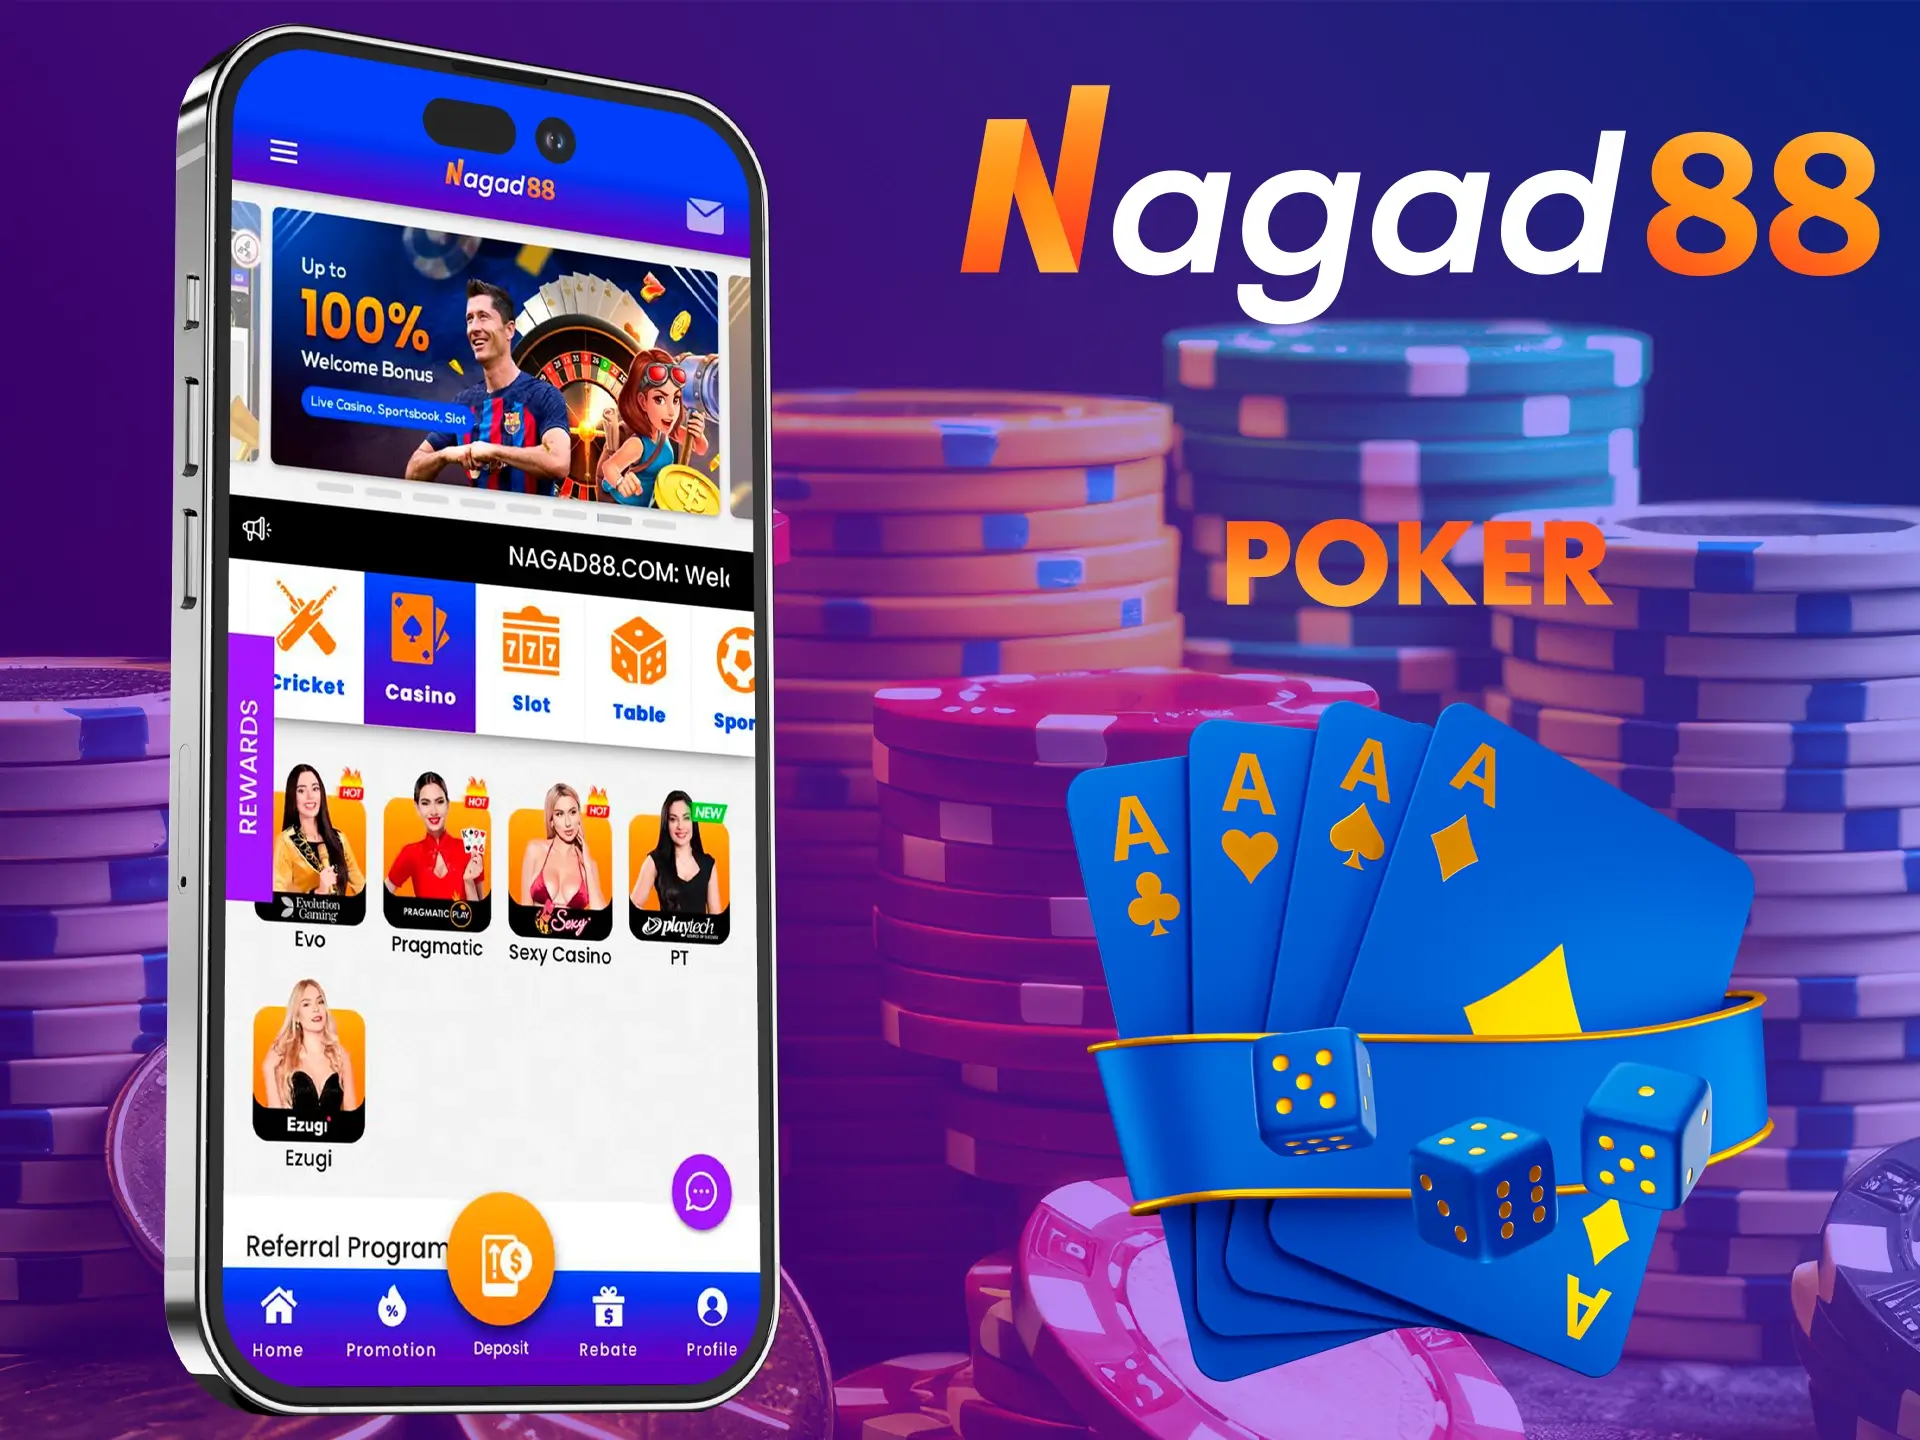 A wide selection of poker will not let a card game lover get bored at Nagad88 Casino.